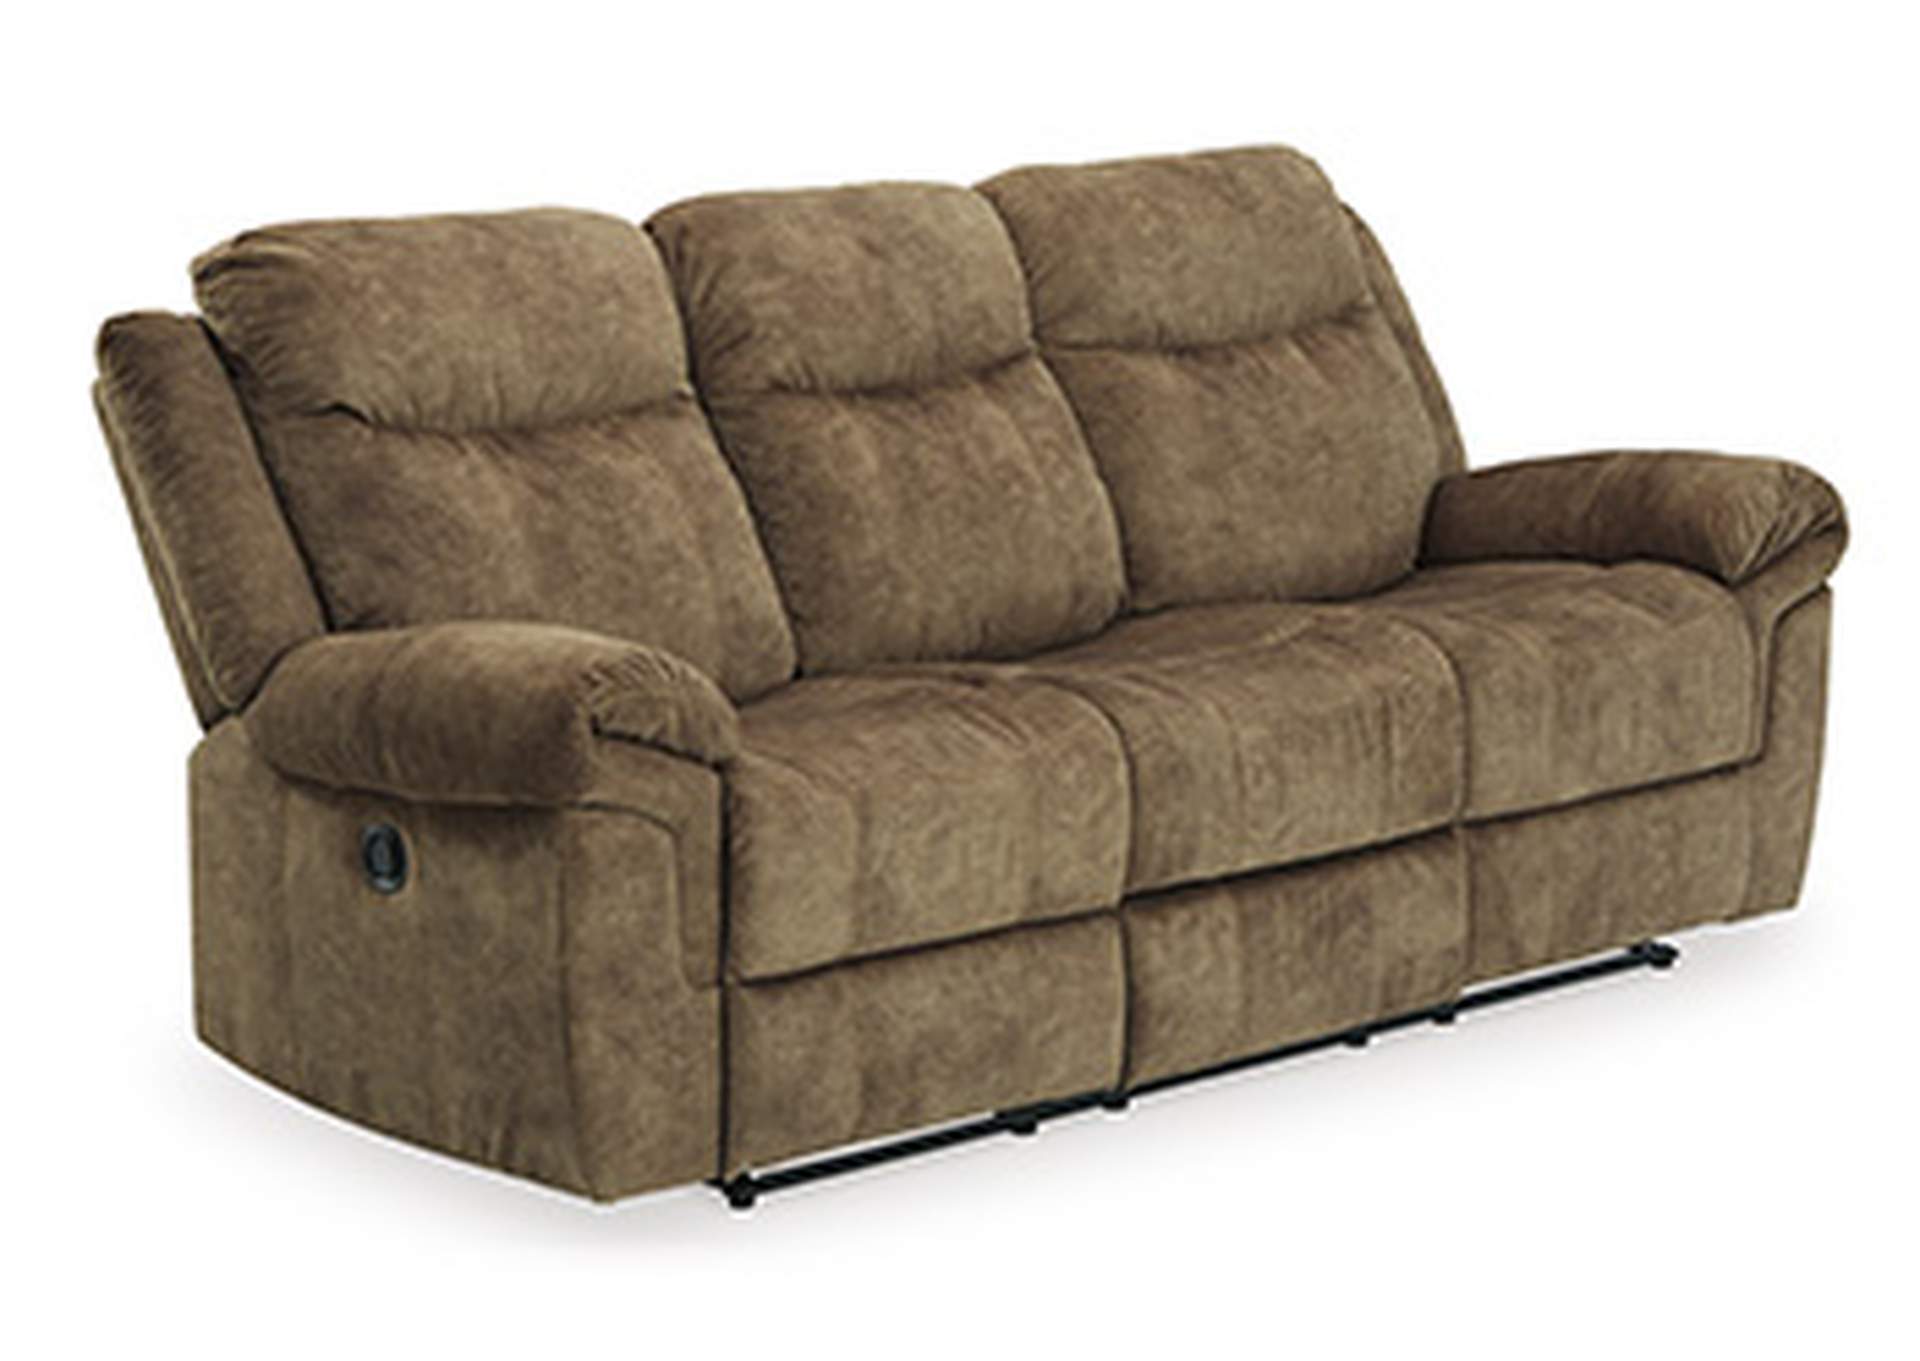 Huddle-Up Reclining Sofa with Drop Down Table,Signature Design By Ashley